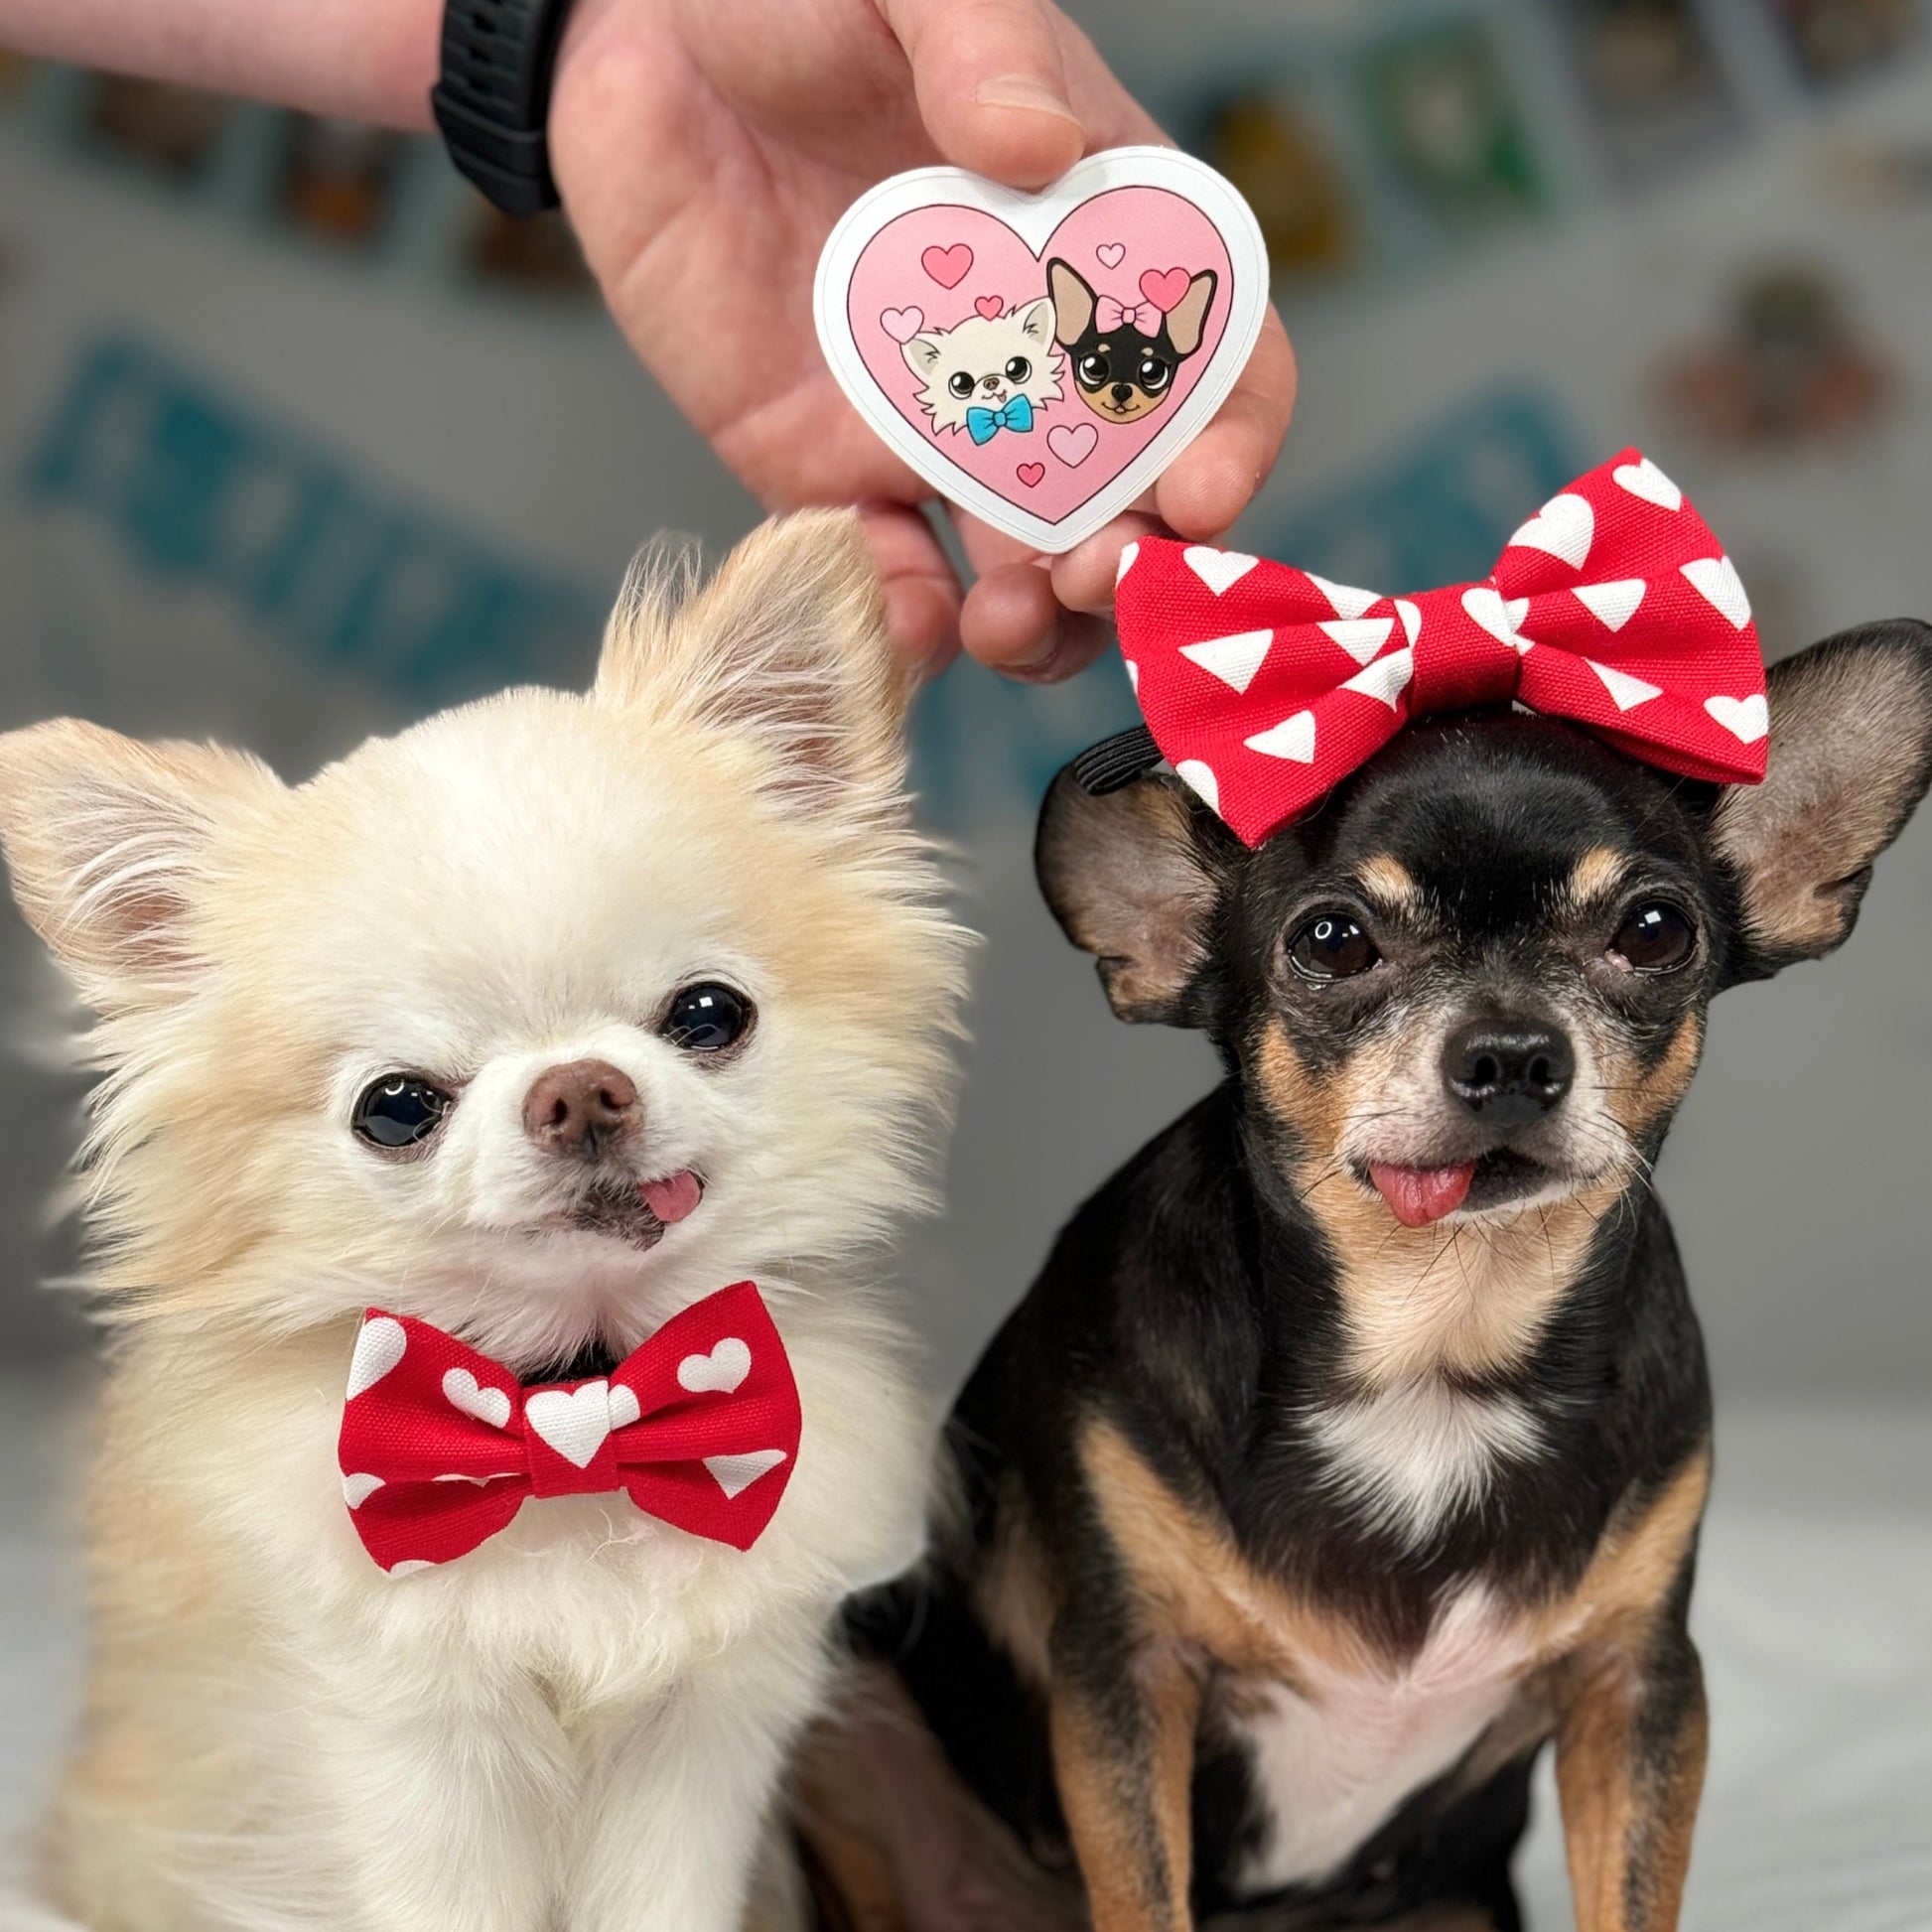 A hand holding Cedric & Maya's Sibling Heart Sticker above the real-life Tiny Chihuahuas Cedric, wearing a heart bow tie, and Maya with a heart bow, showcasing the sticker's design of sibling love against the backdrop of its inspirations, creating a delightful and heartwarming comparison.